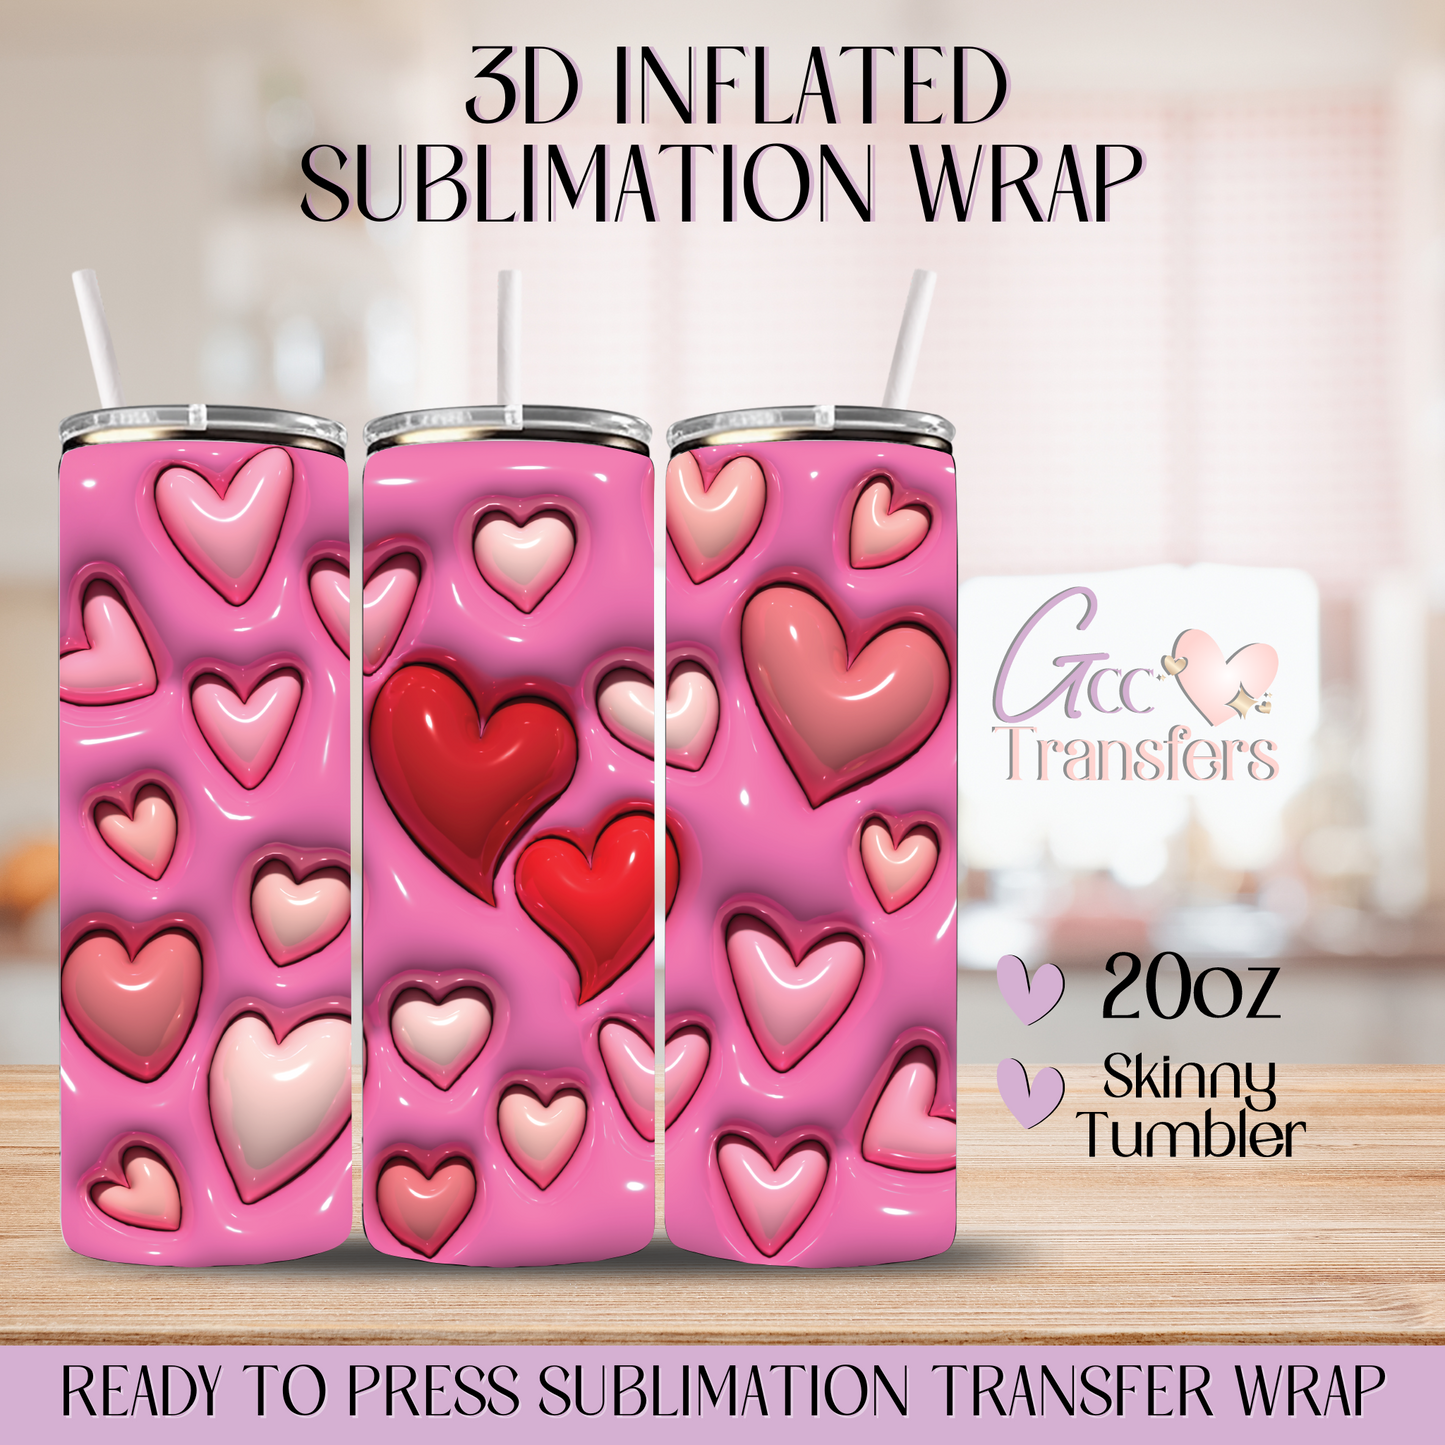 Valentine's Day Hearts - 20oz 3D Inflated Sublimation Wrap